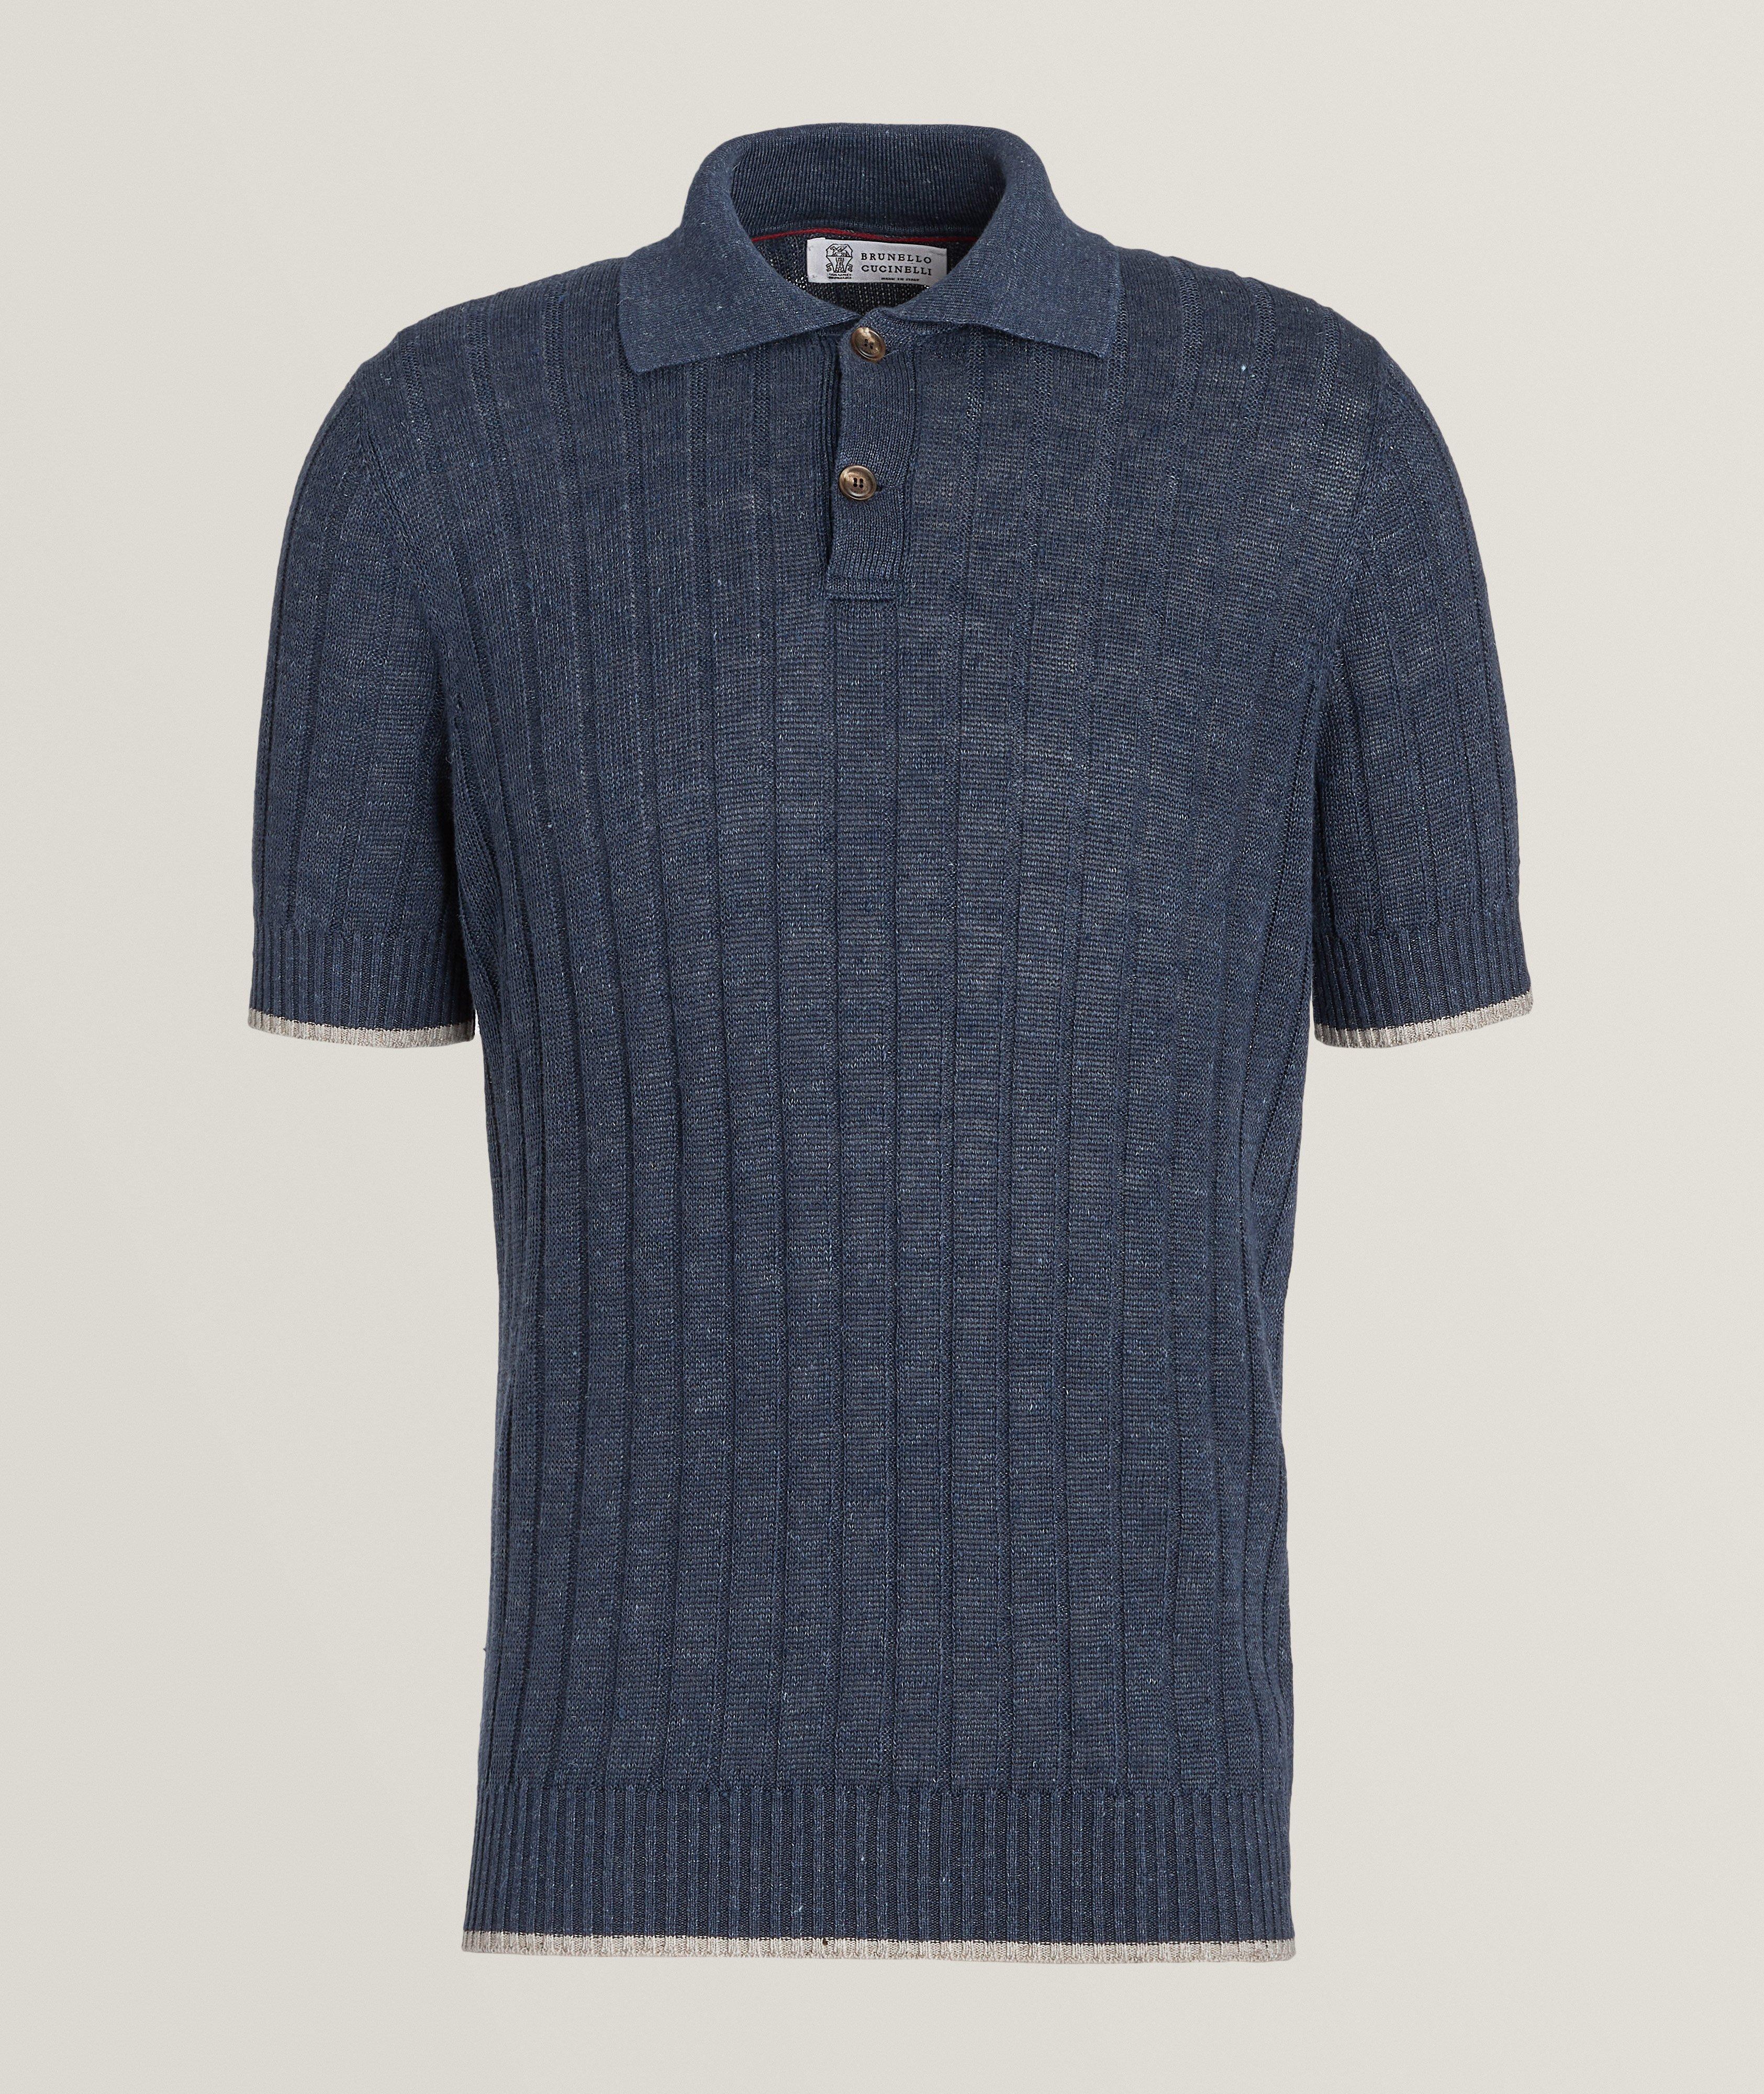 Ribbed Knit Linen-Cotton Polo  image 0